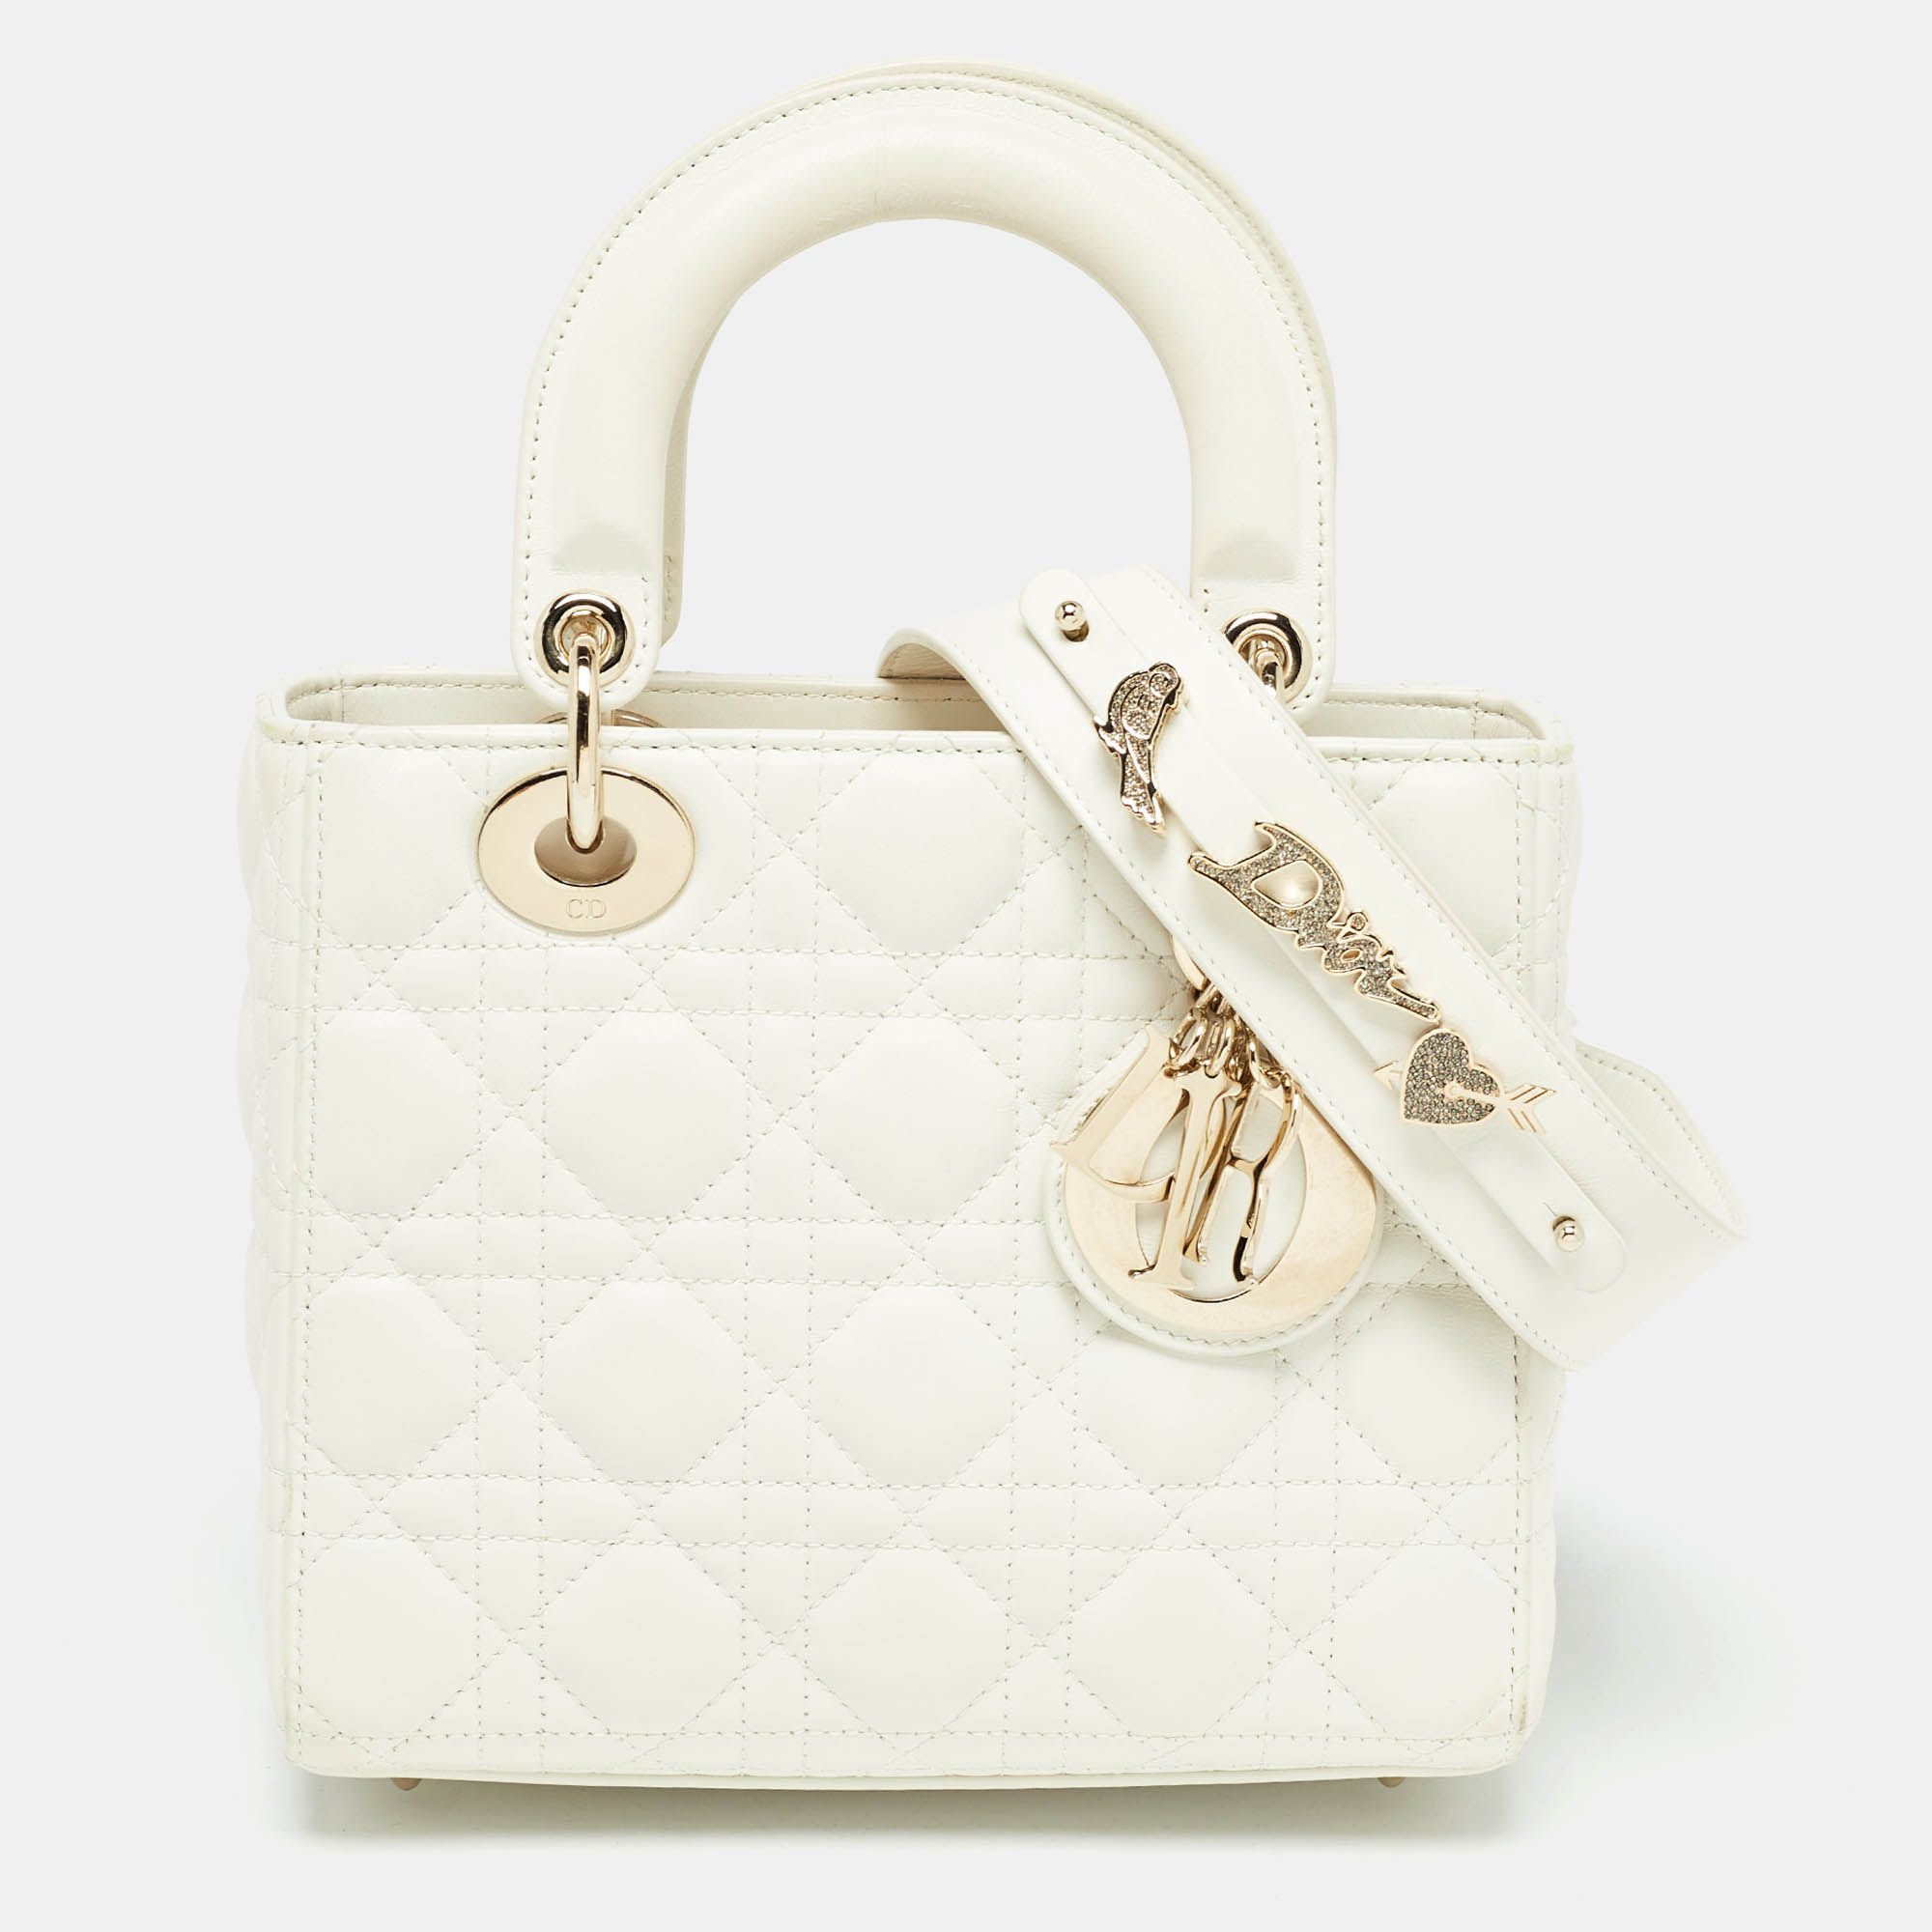 Dior off white cannage leather small lady dior my abcdior tote